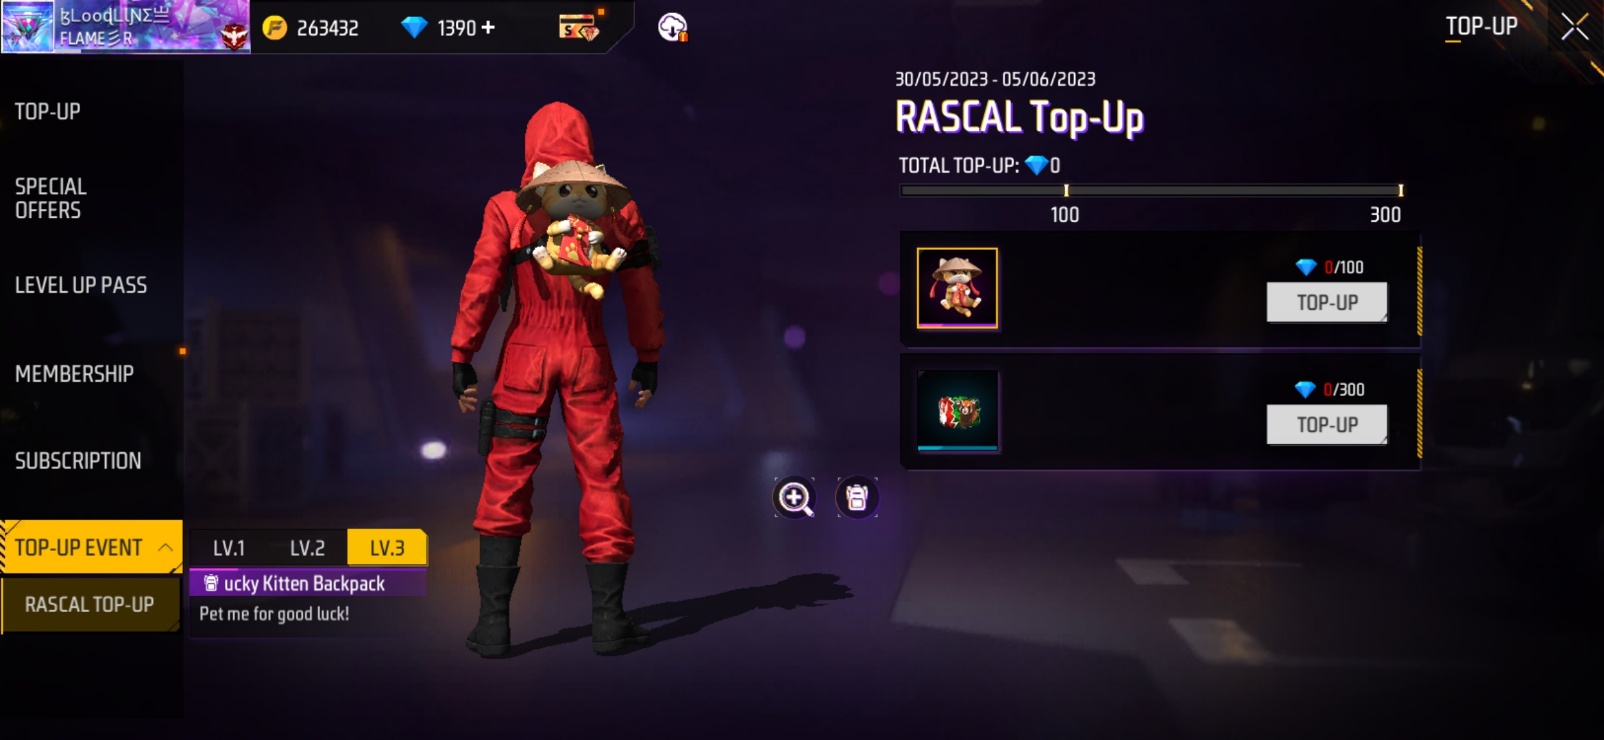 Rascal Top-up: New Top-up Event In Free Fire Max